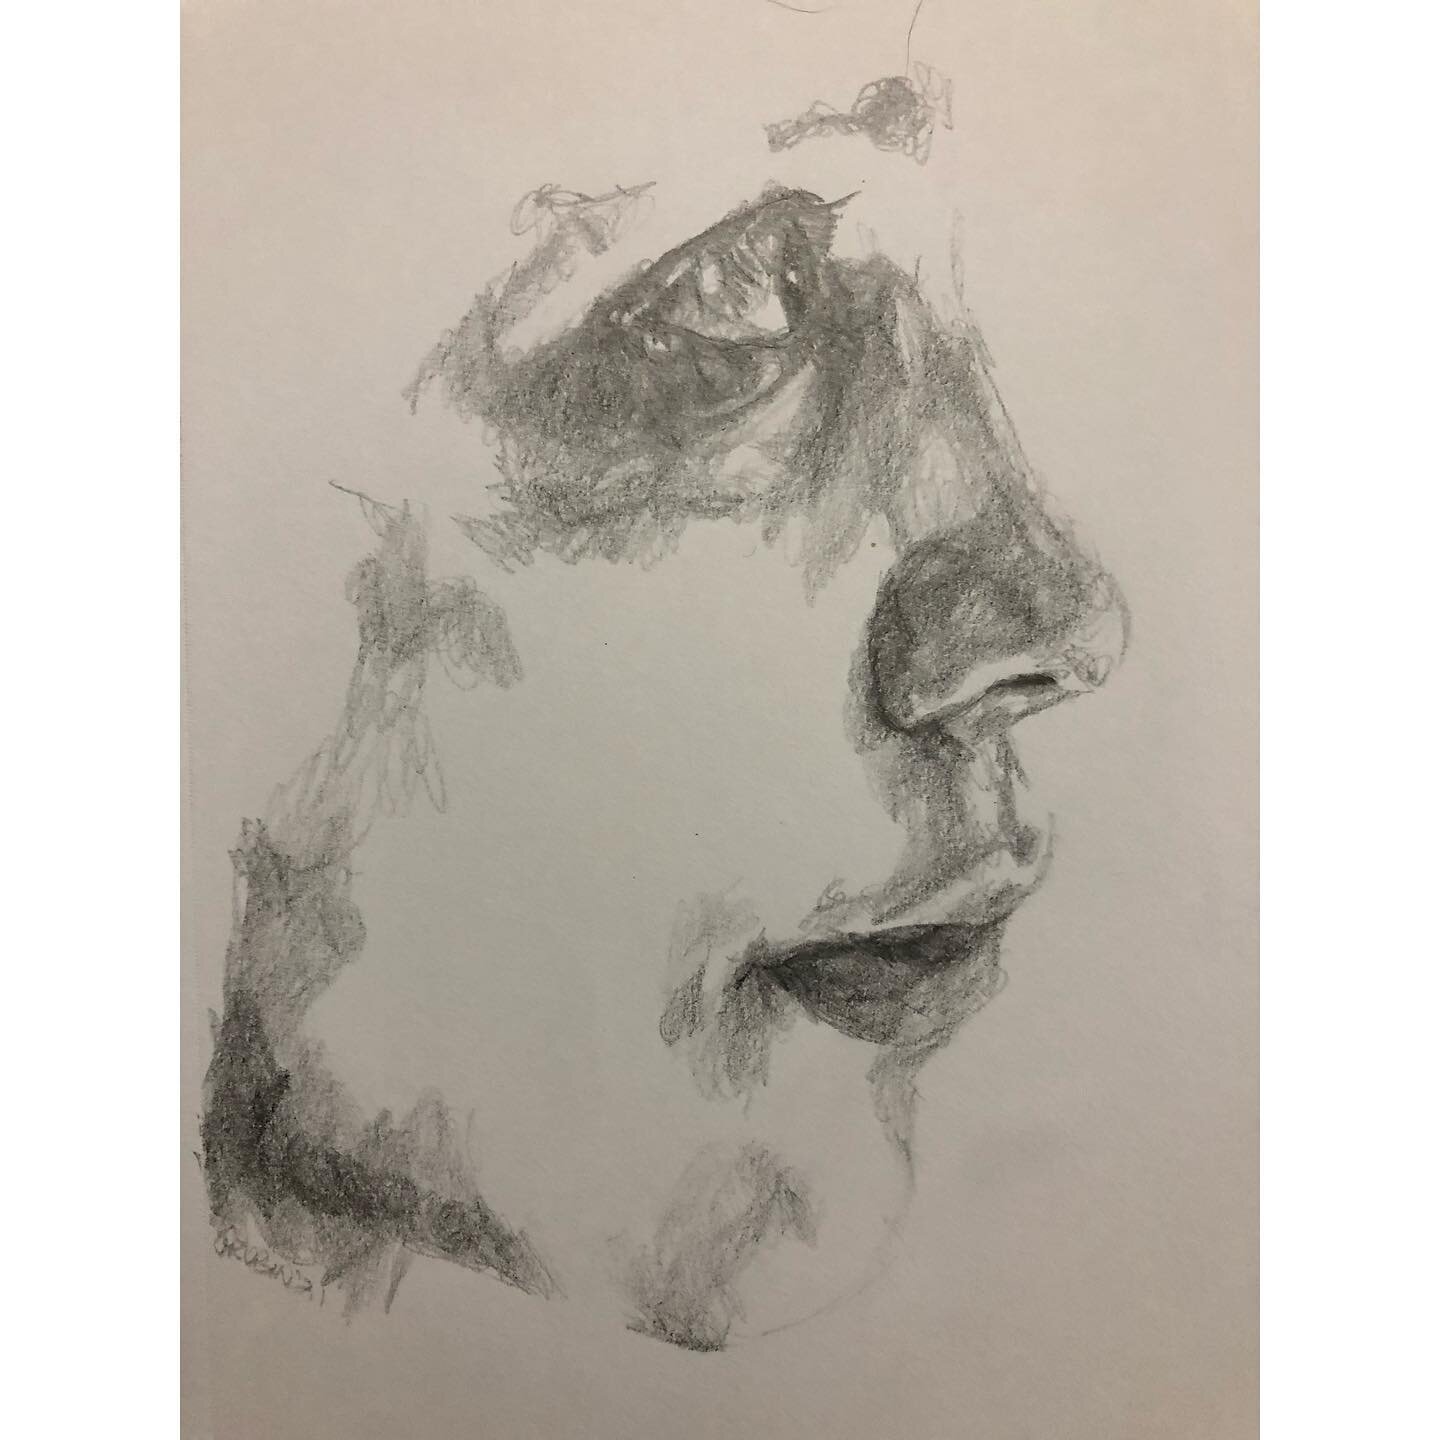 #0450

Longing. 

#smallworks #drawing #drawingaday #graphitedrawing #pencildrawing #lifedrawing #emotions #remembering #rememberingseries  #pencilportrait  #art #artist #sketch #portraiture